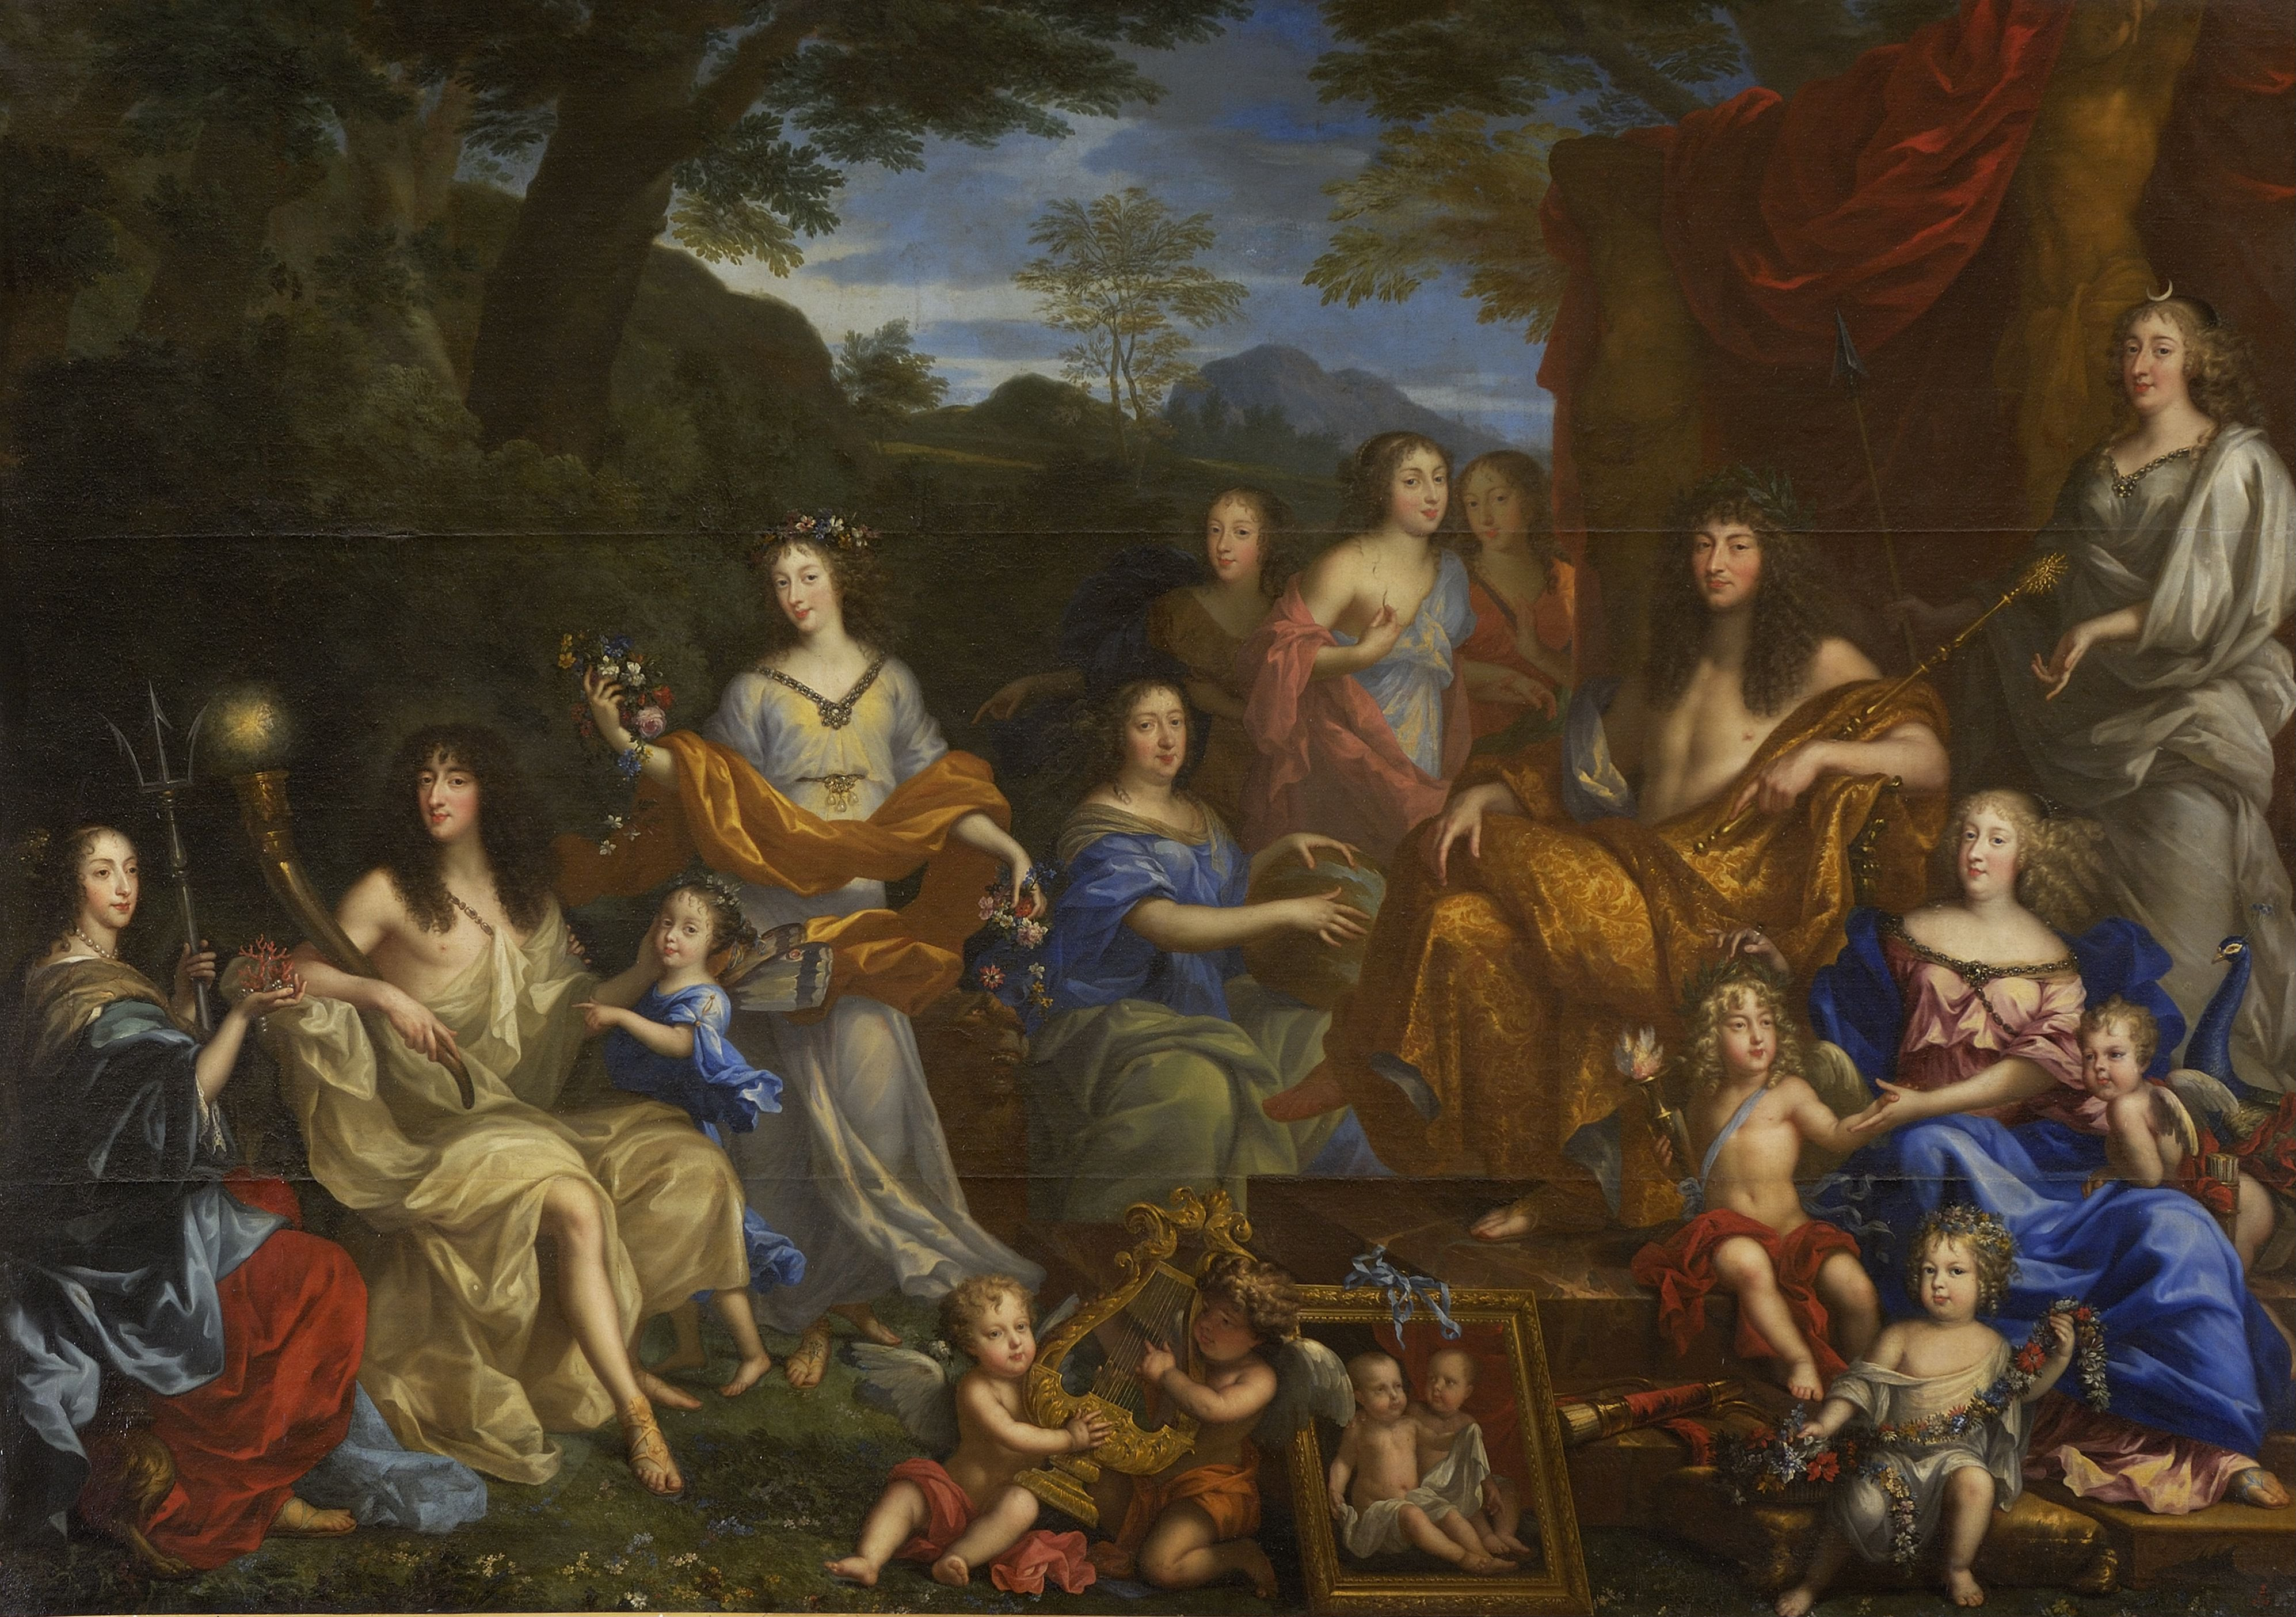 Louis-XIV-and-the-Royal-Family-1670.jpg